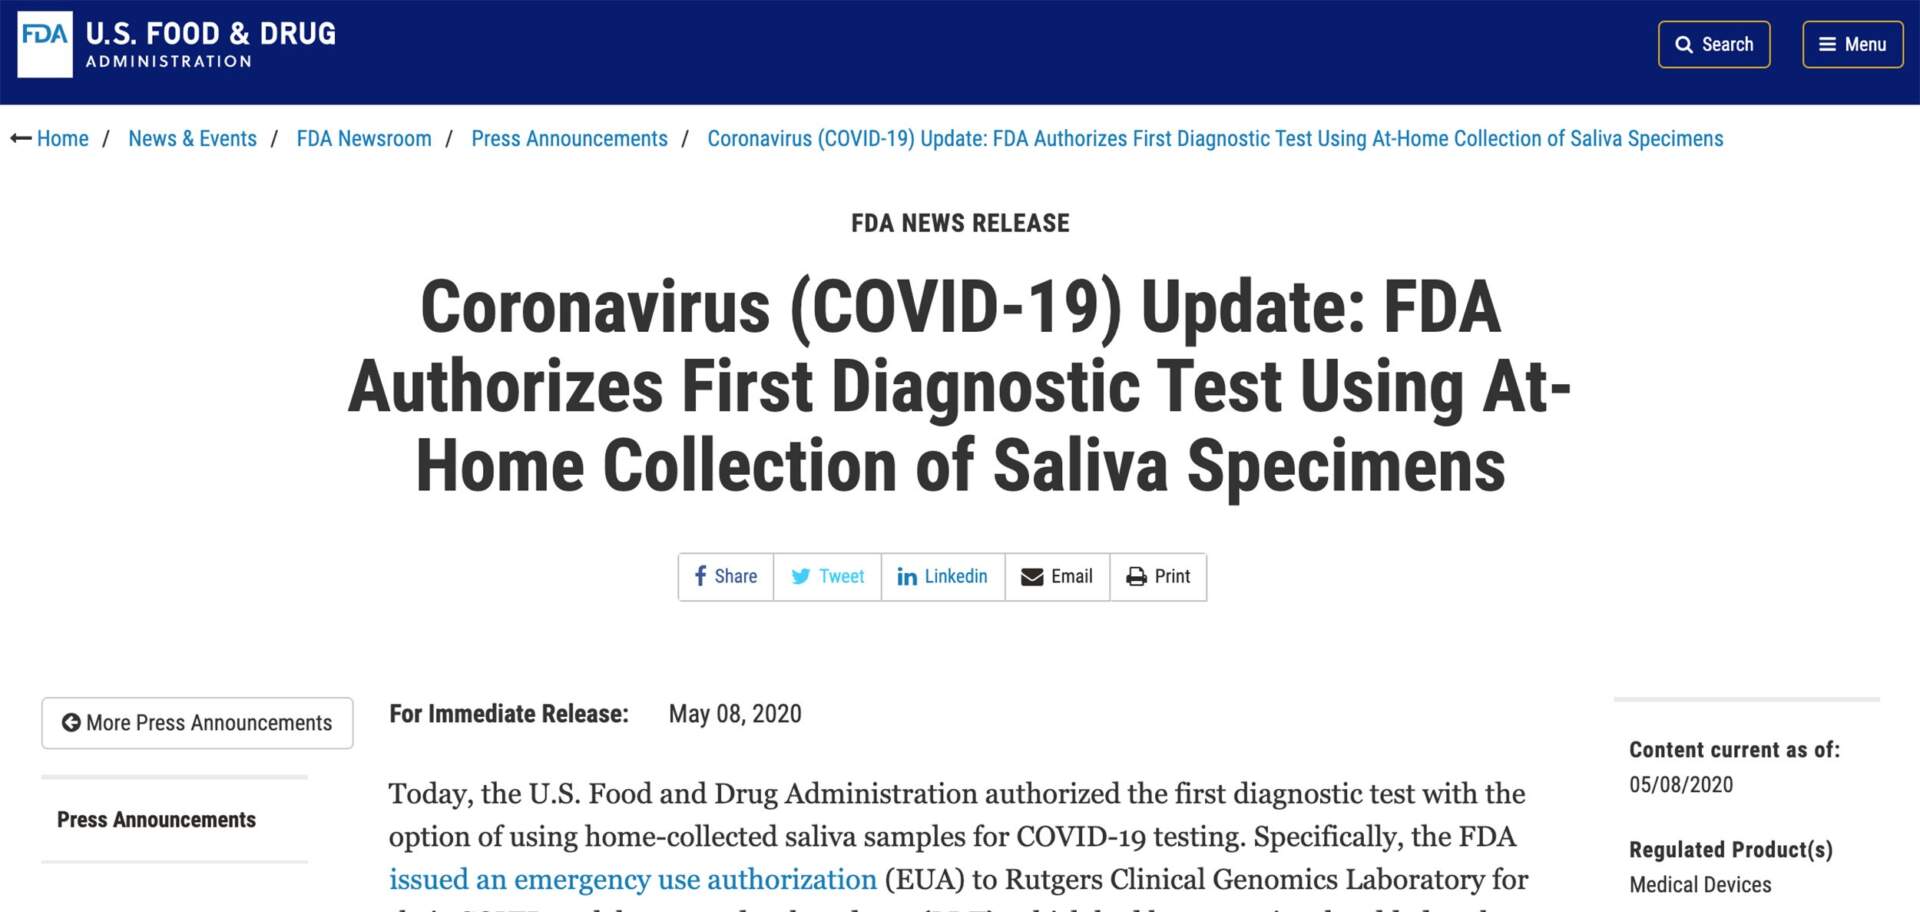 FDA Expands EUA Approval for at-home saliva collection in COVID-19 Testing